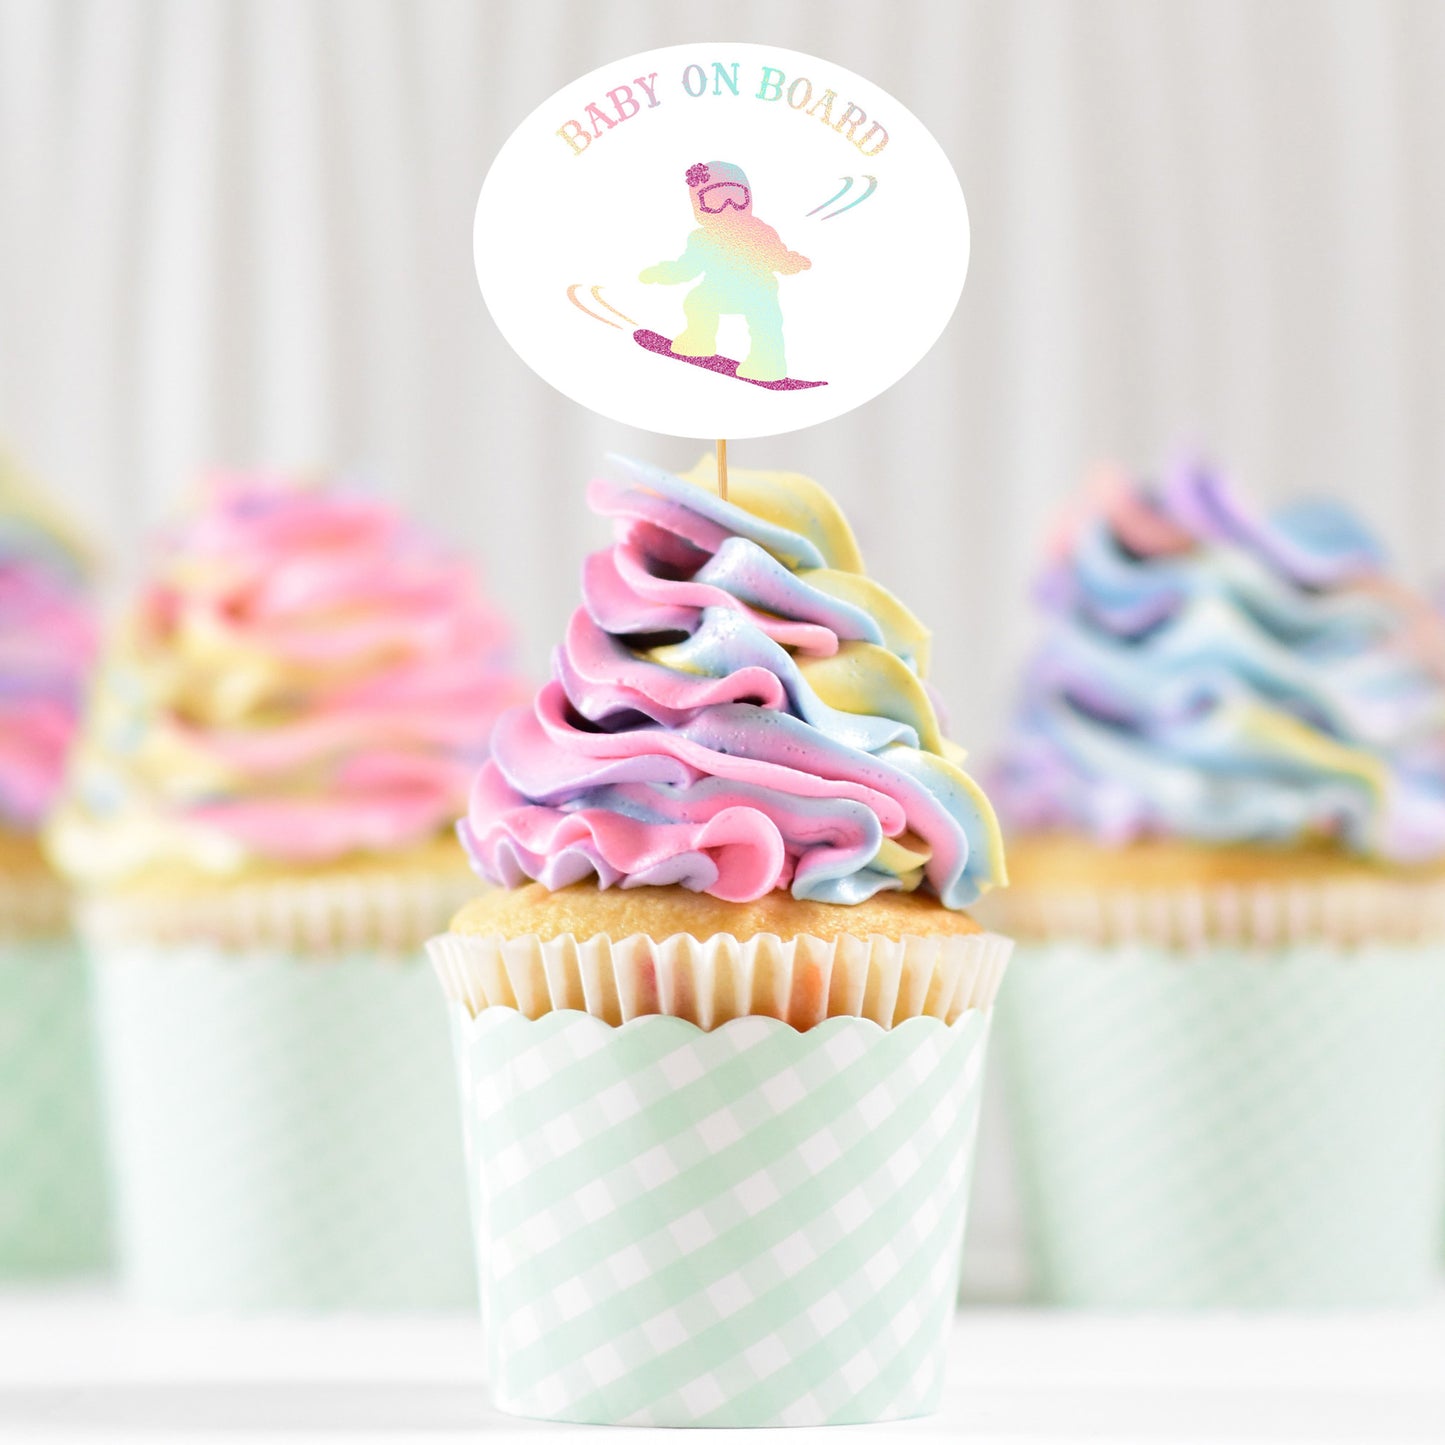 
                  
                    pastel swirl cupcakes with a Baby on Board - Snowboarding Girl svg topper
                  
                